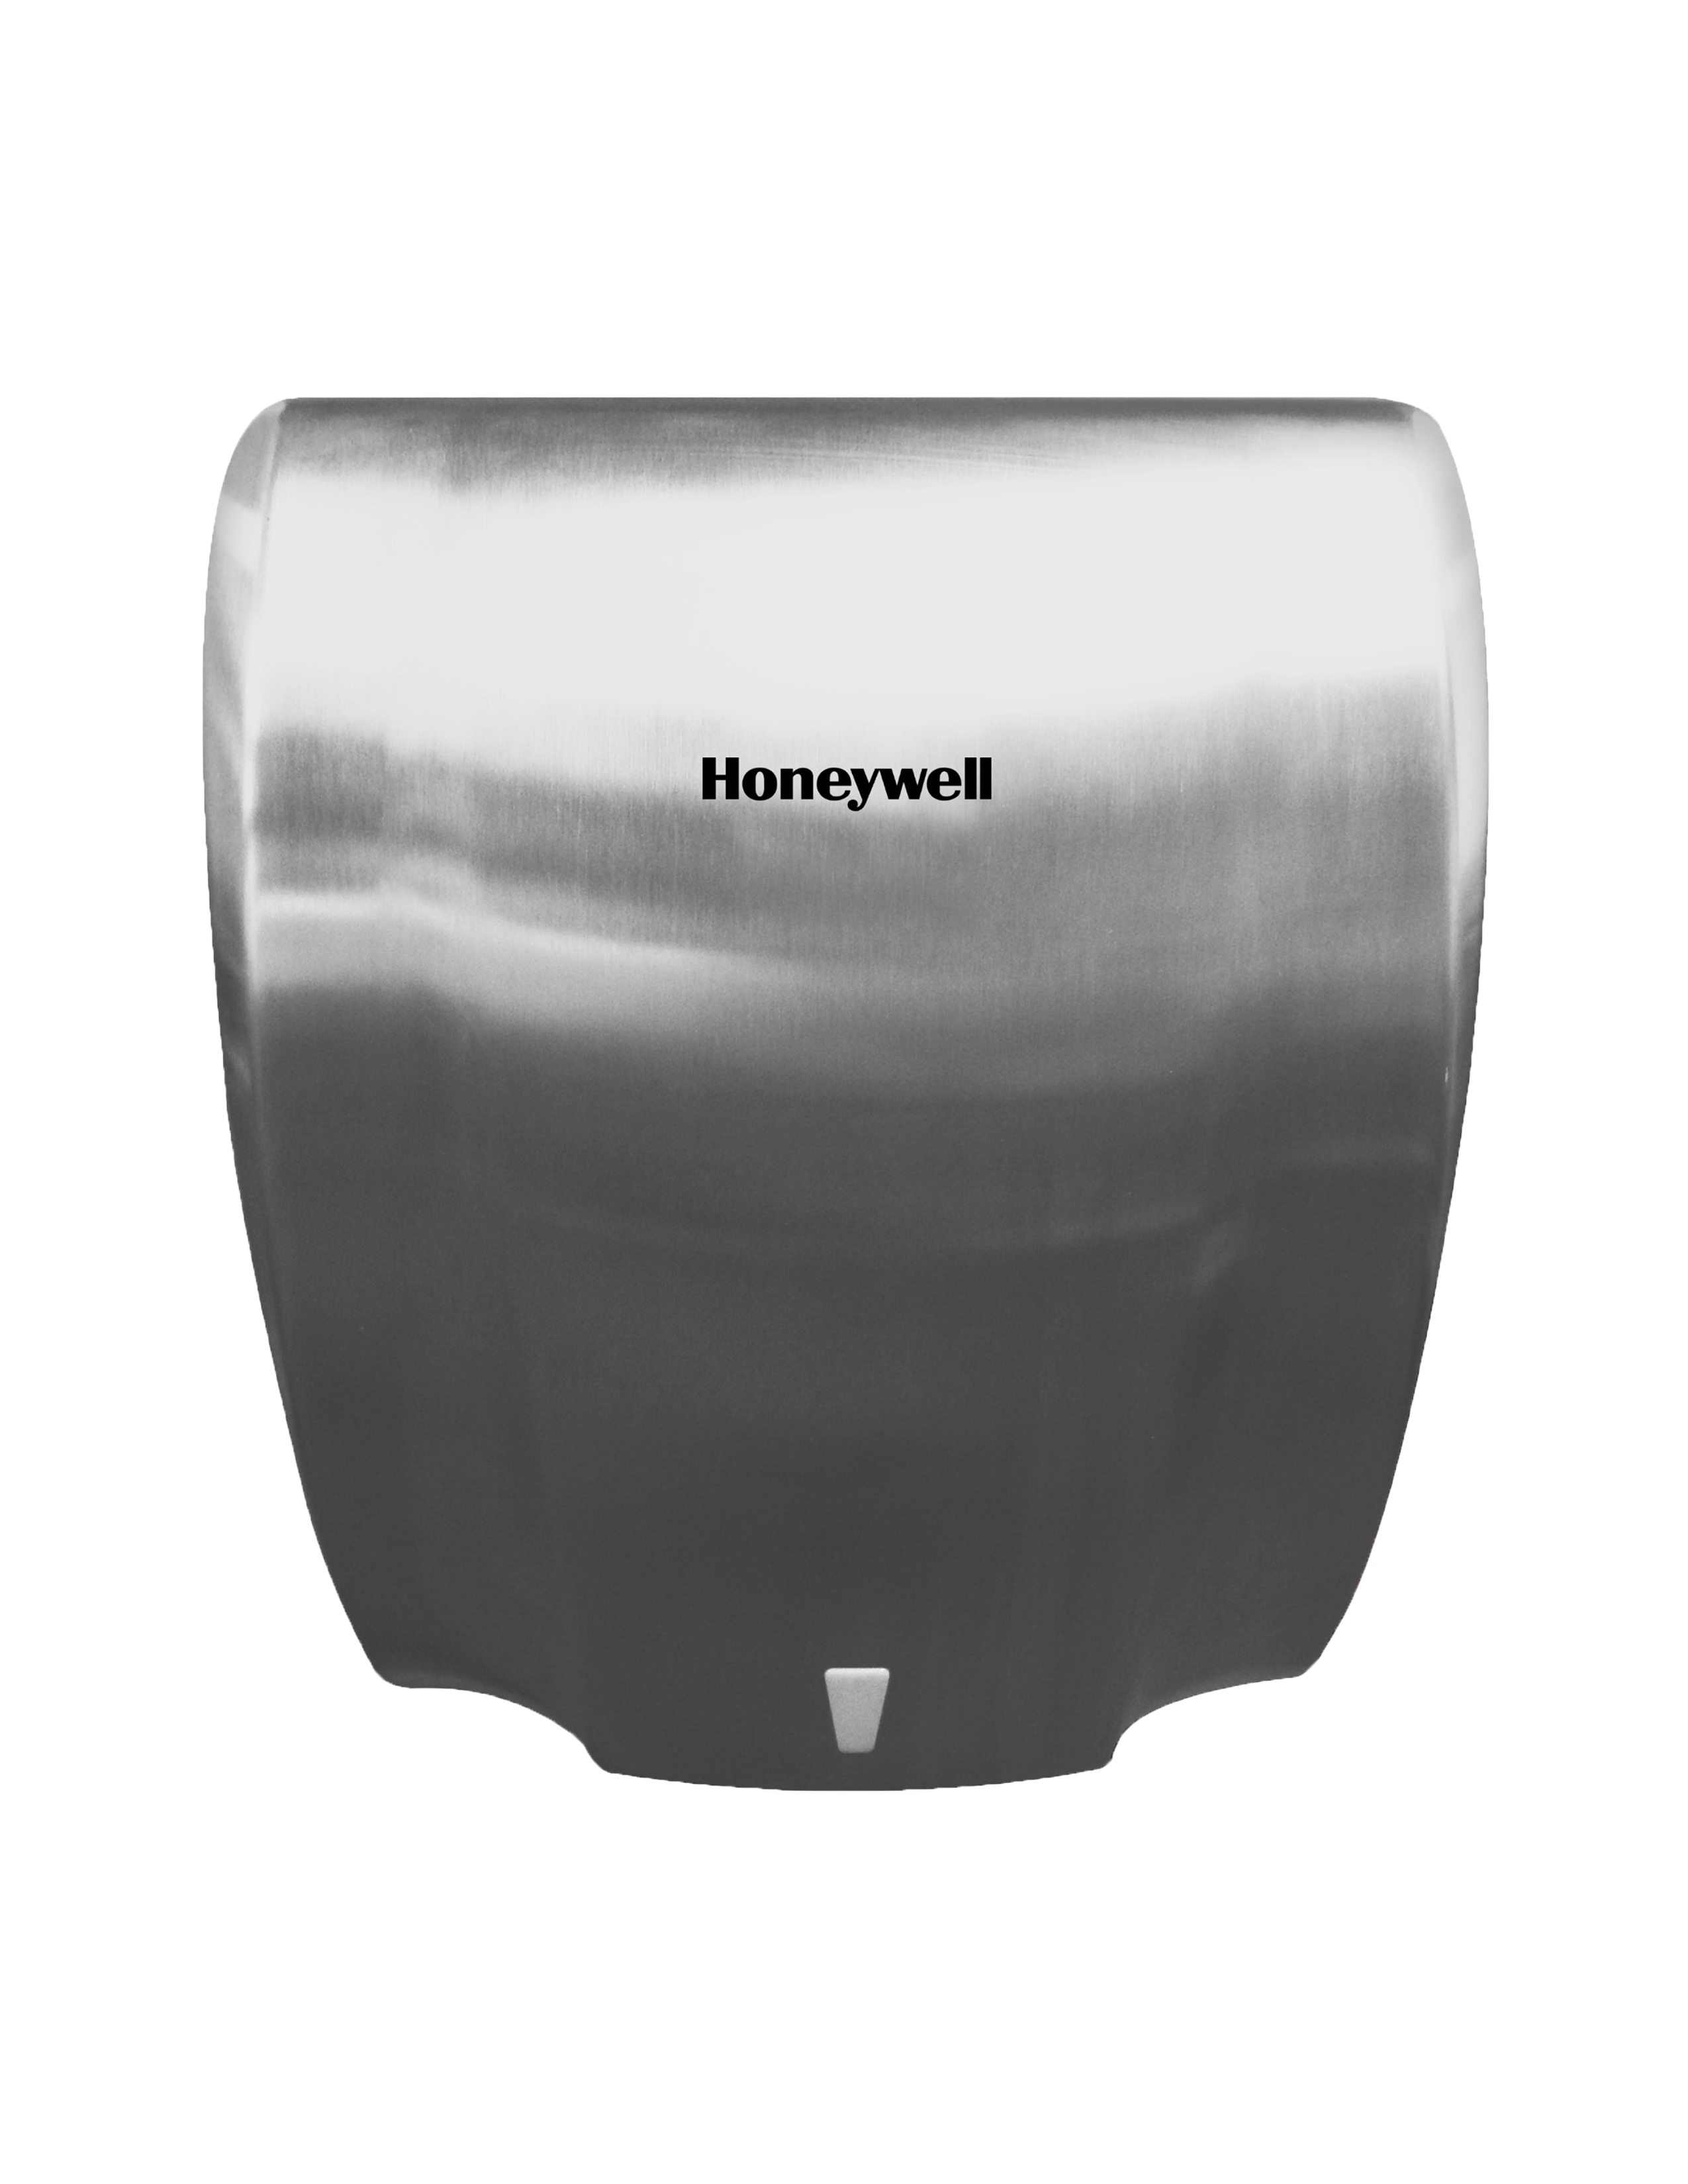 HCHD-310/ Touchless Stainless Steel Commercial Hand Dryer